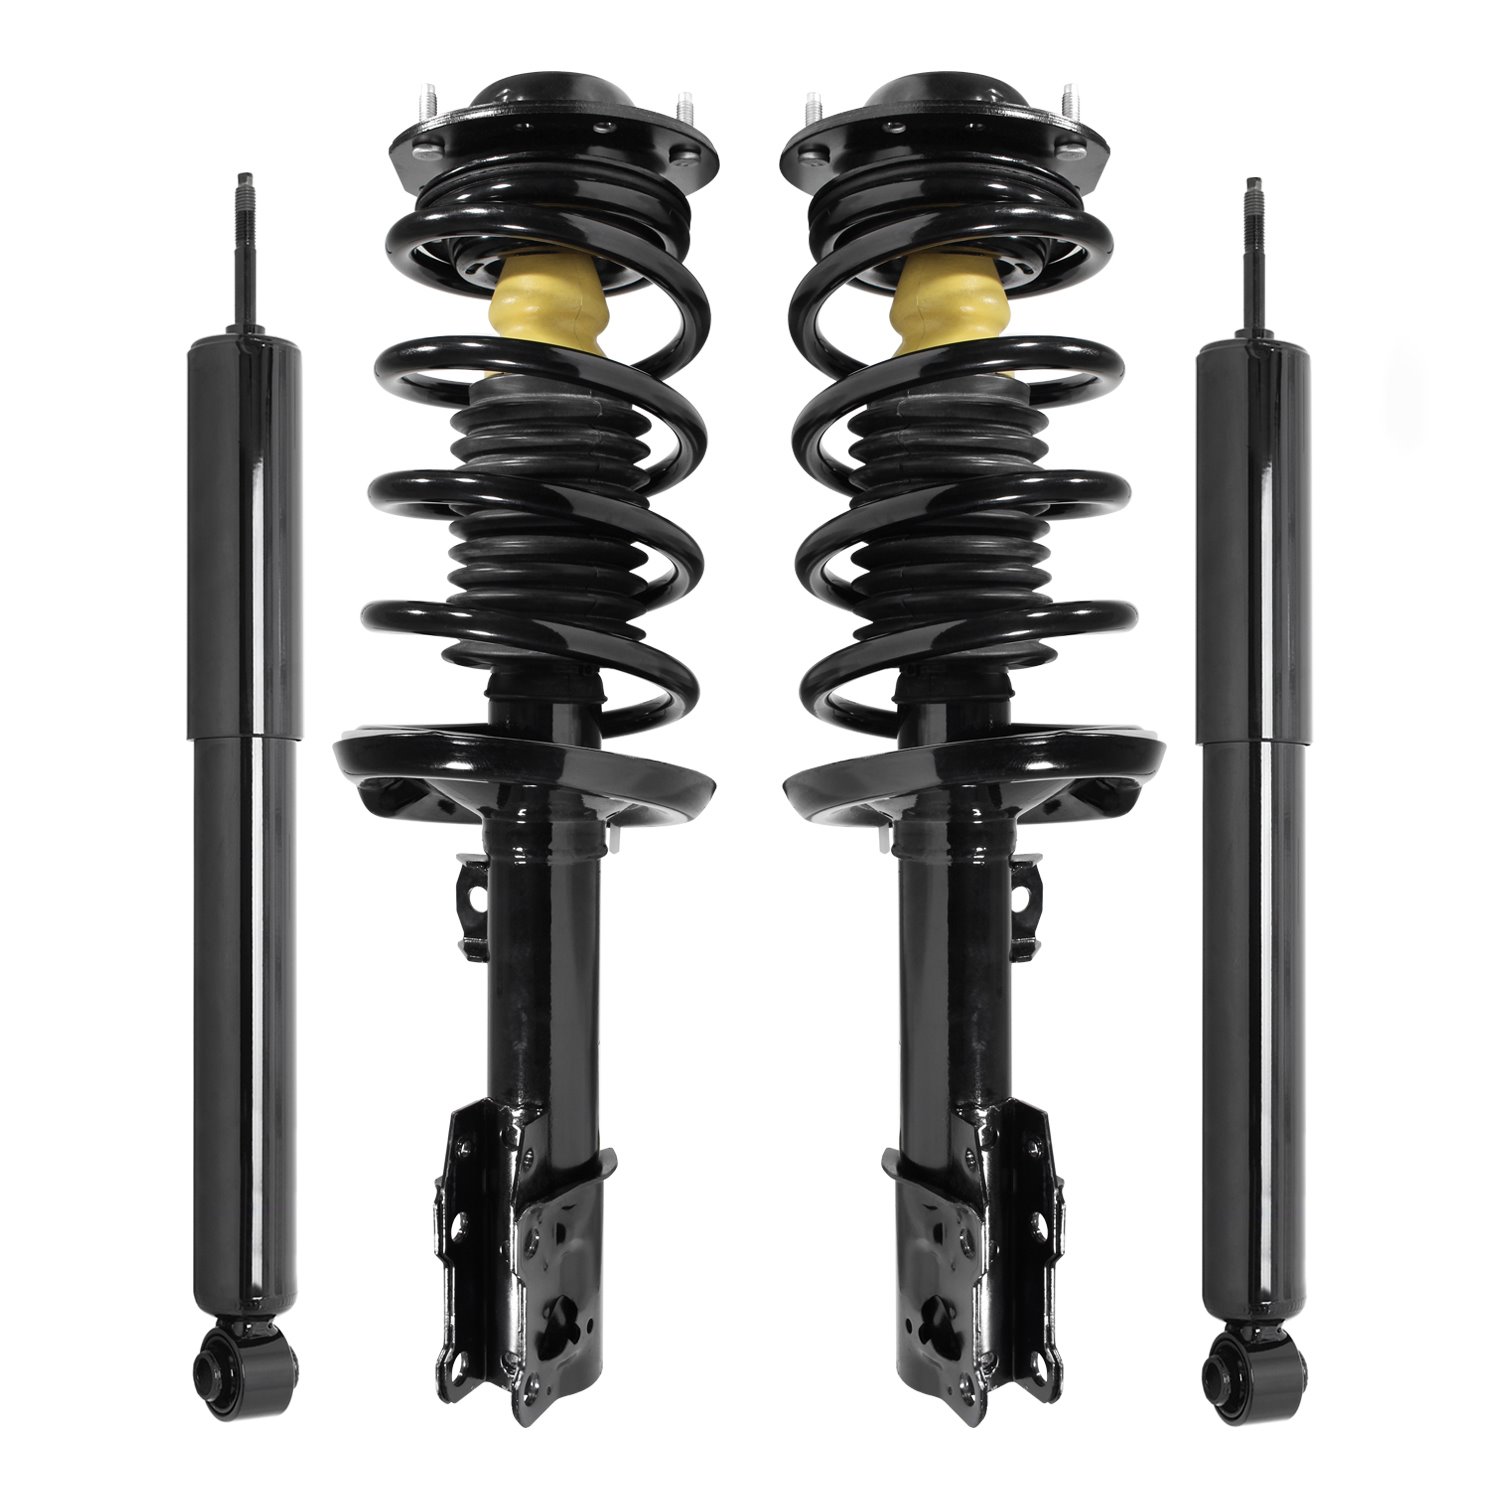 4-11671-251040-001 Front & Rear Suspension Strut & Coil Spring Assembly Fits Select GM